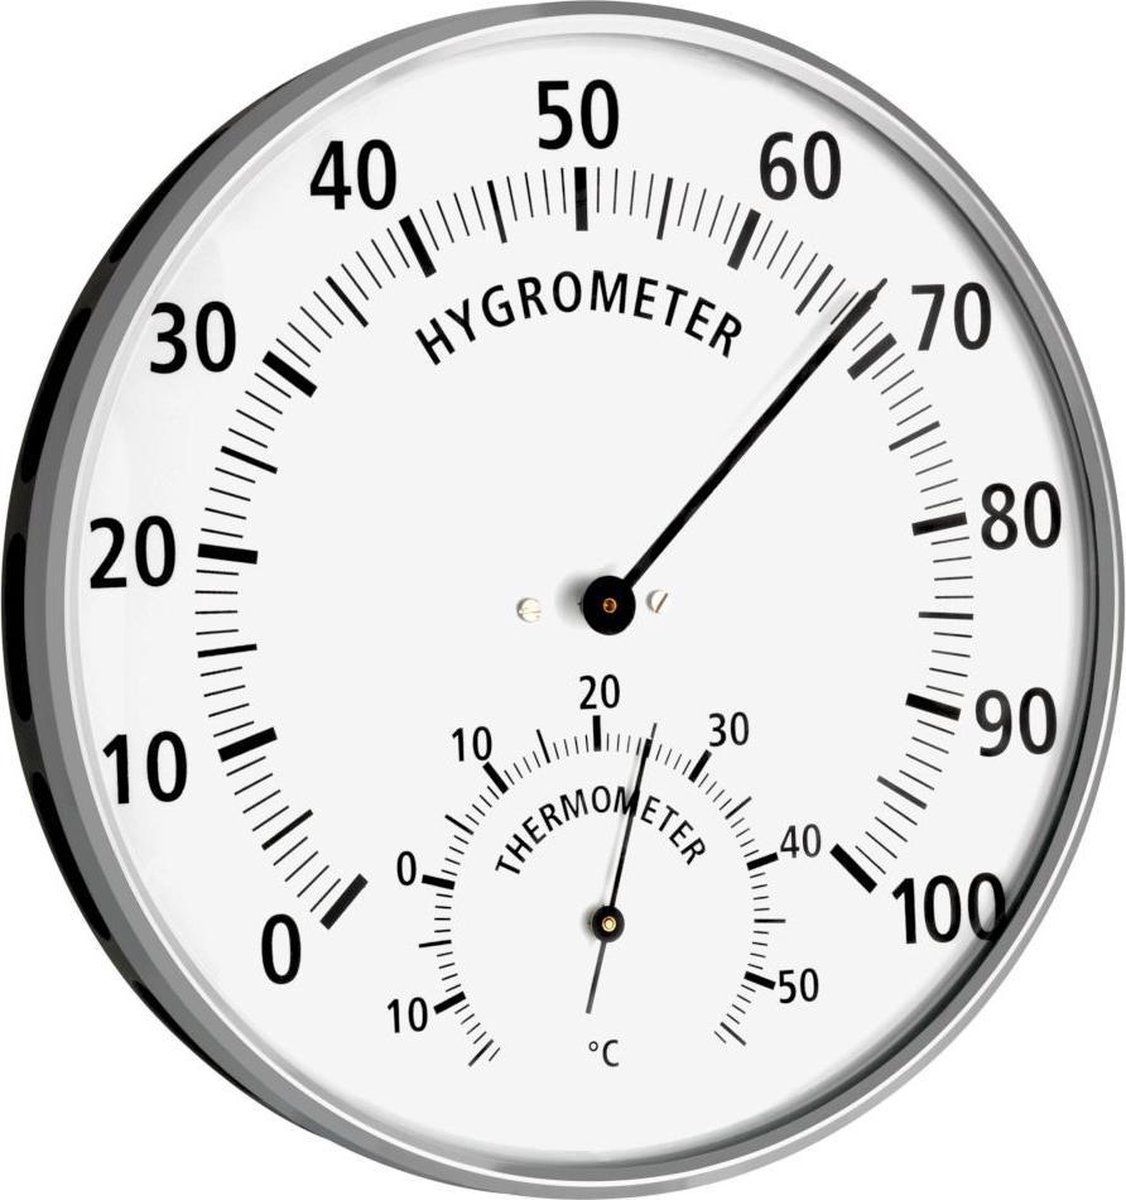 BLTY01 Thermometer Hygrometer wine cellar